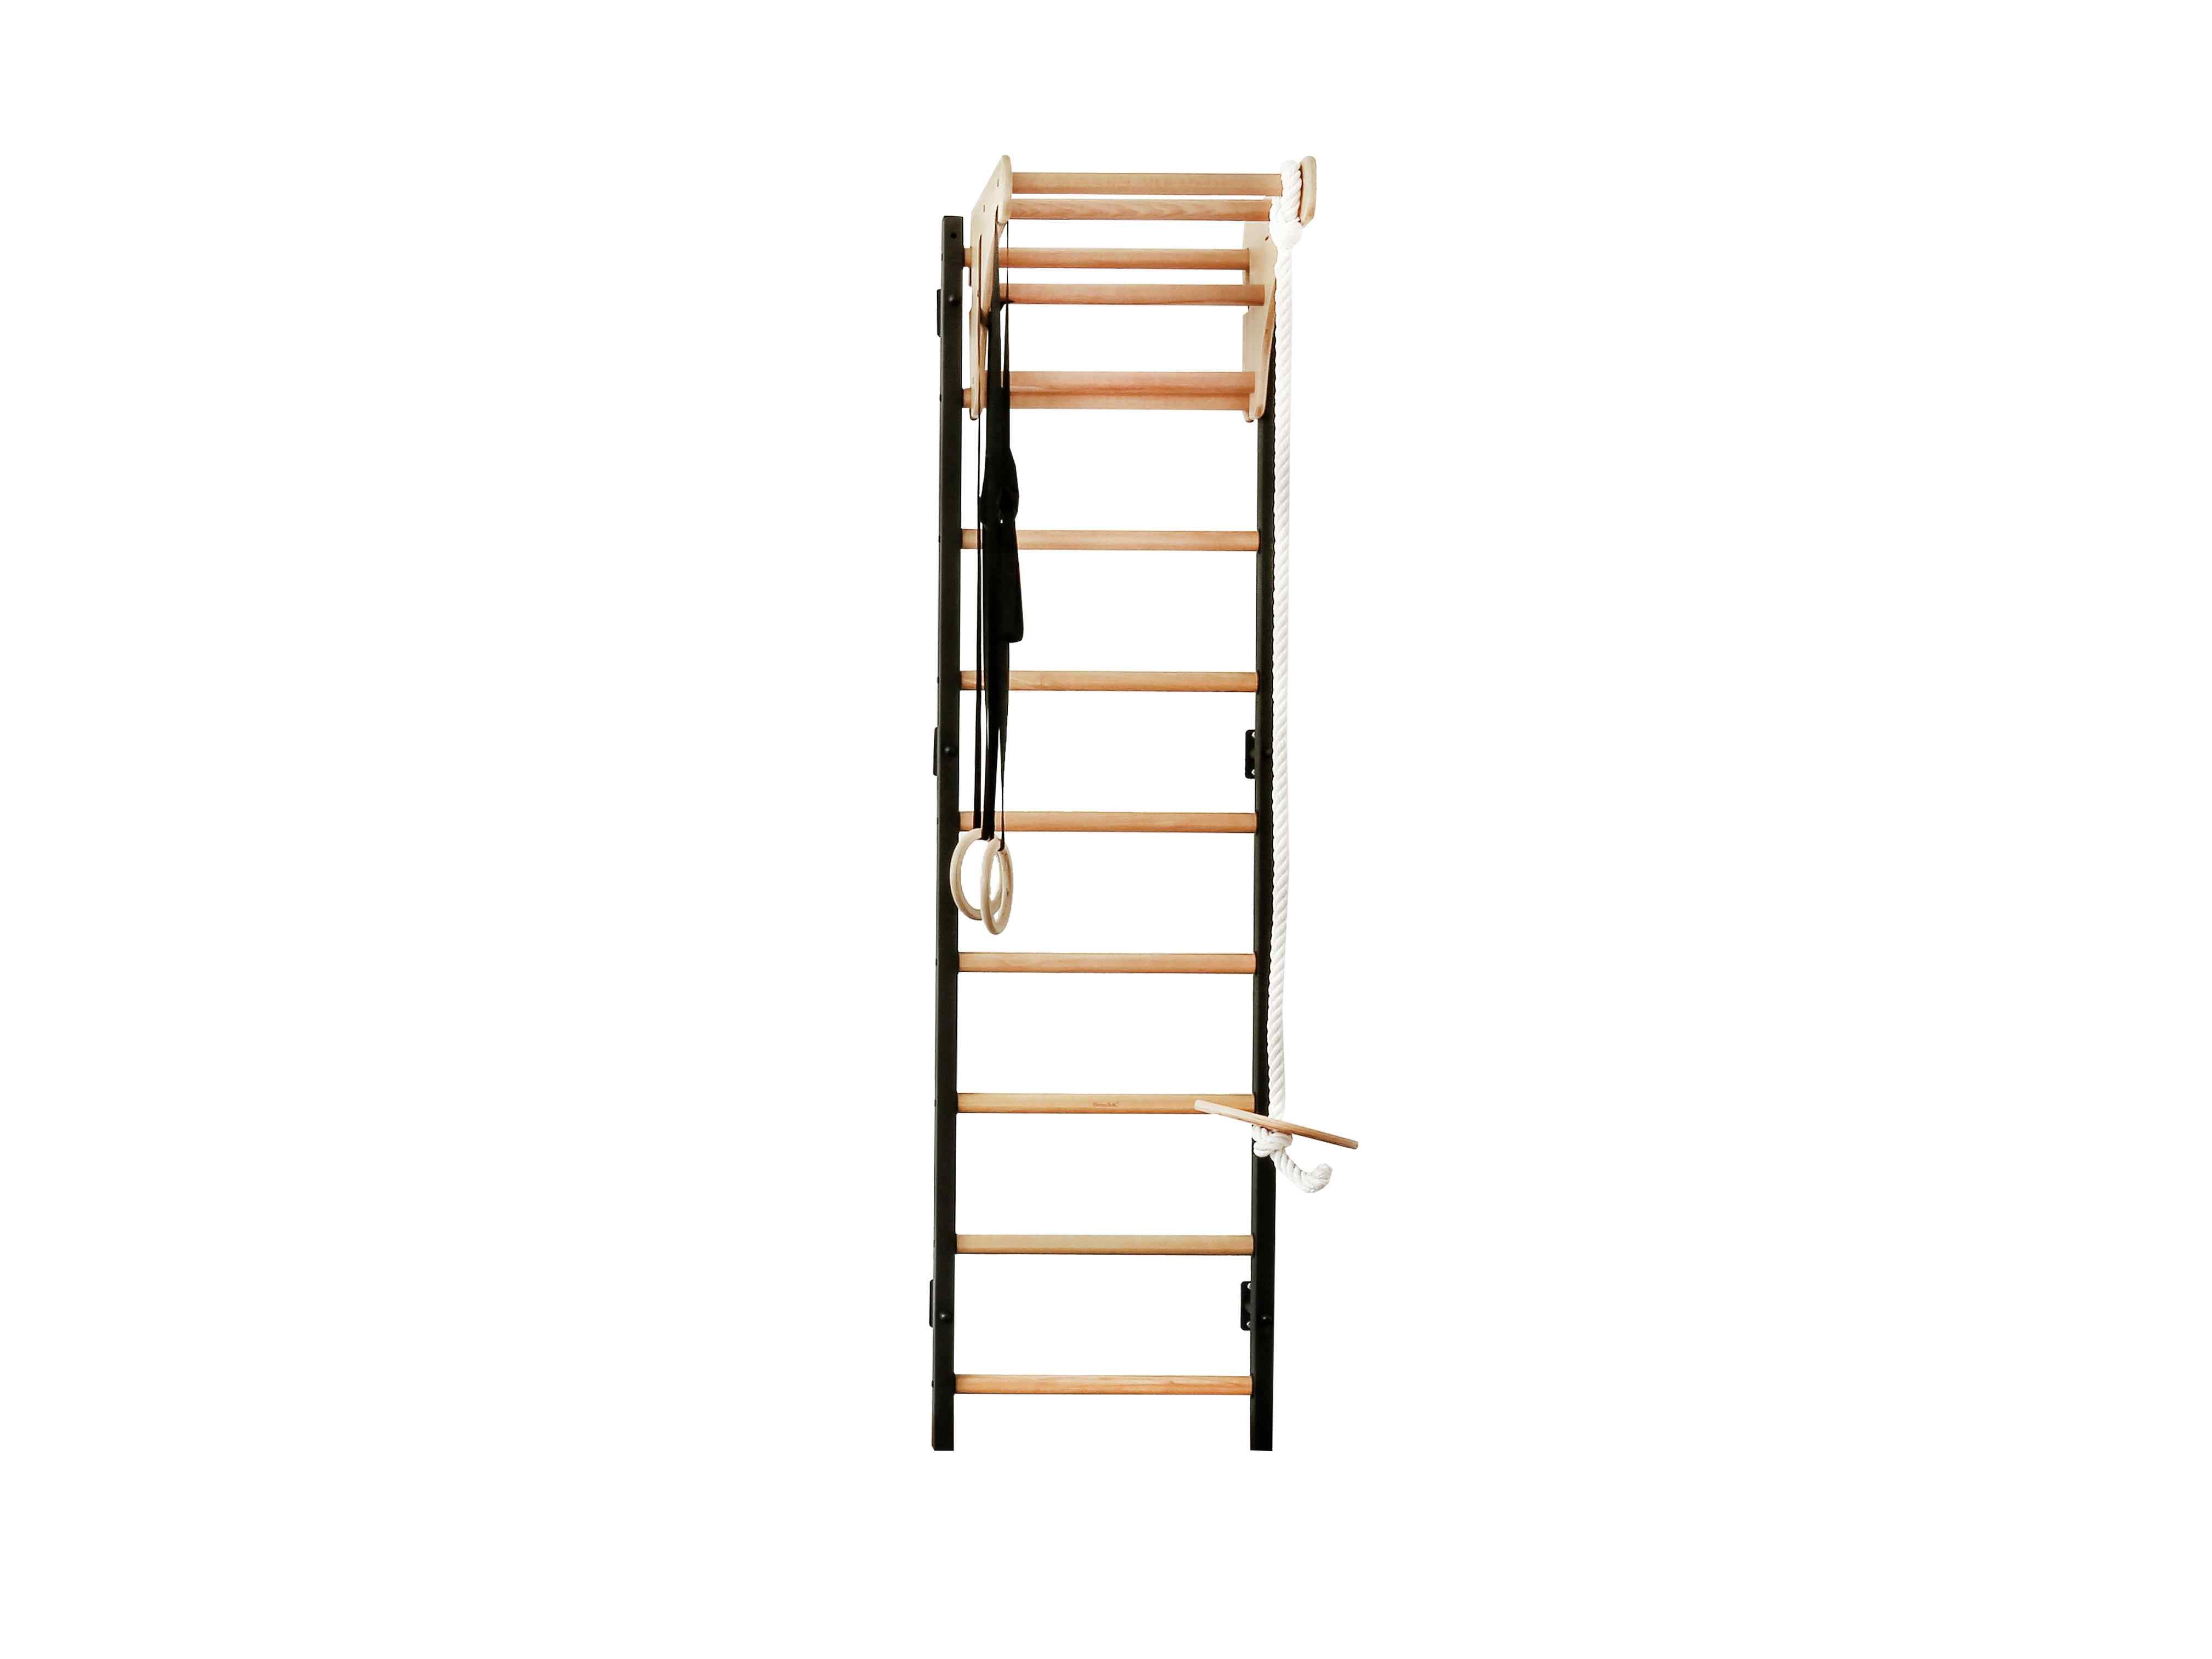 BenchK 711 Wall Bars with Gymnastic Accessories Swedish Ladder Home Gym Equipment